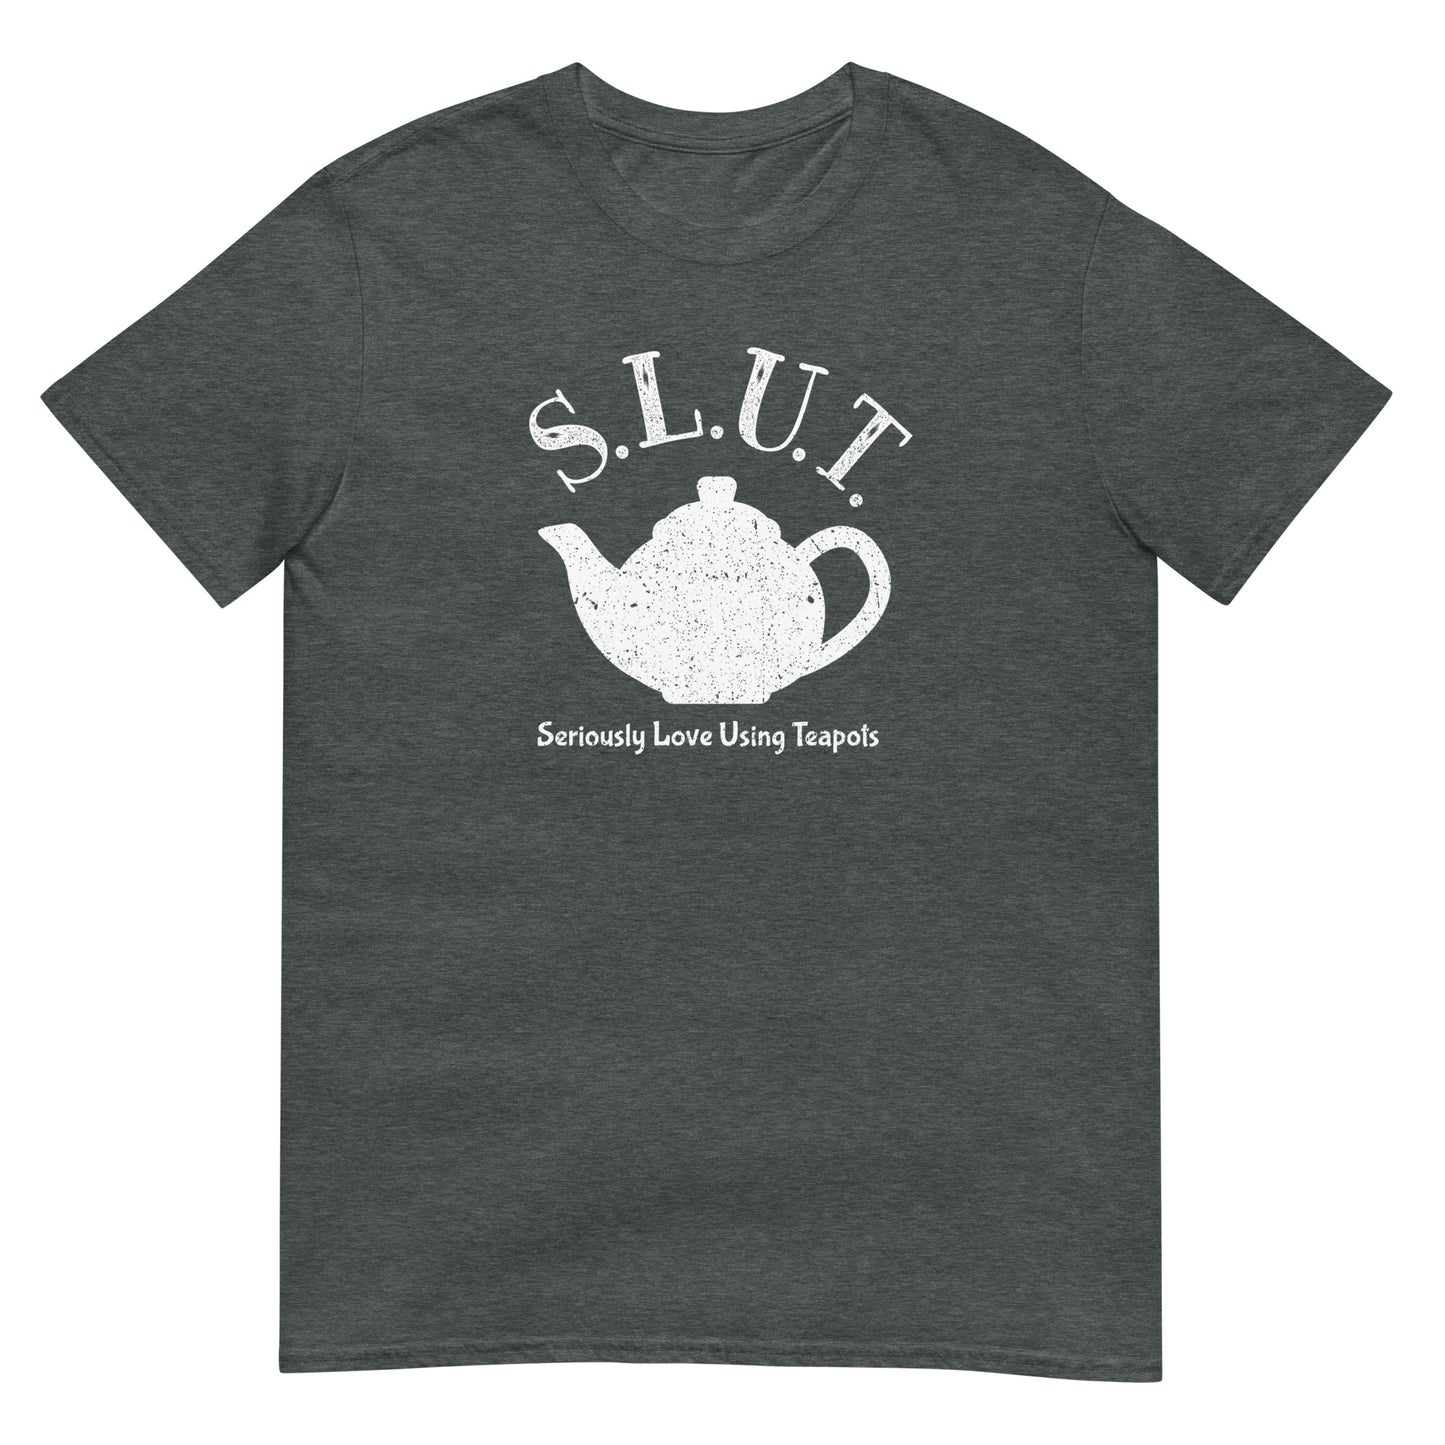 Seriously Love Using Teapots - T-Shirt for Tea Lovers